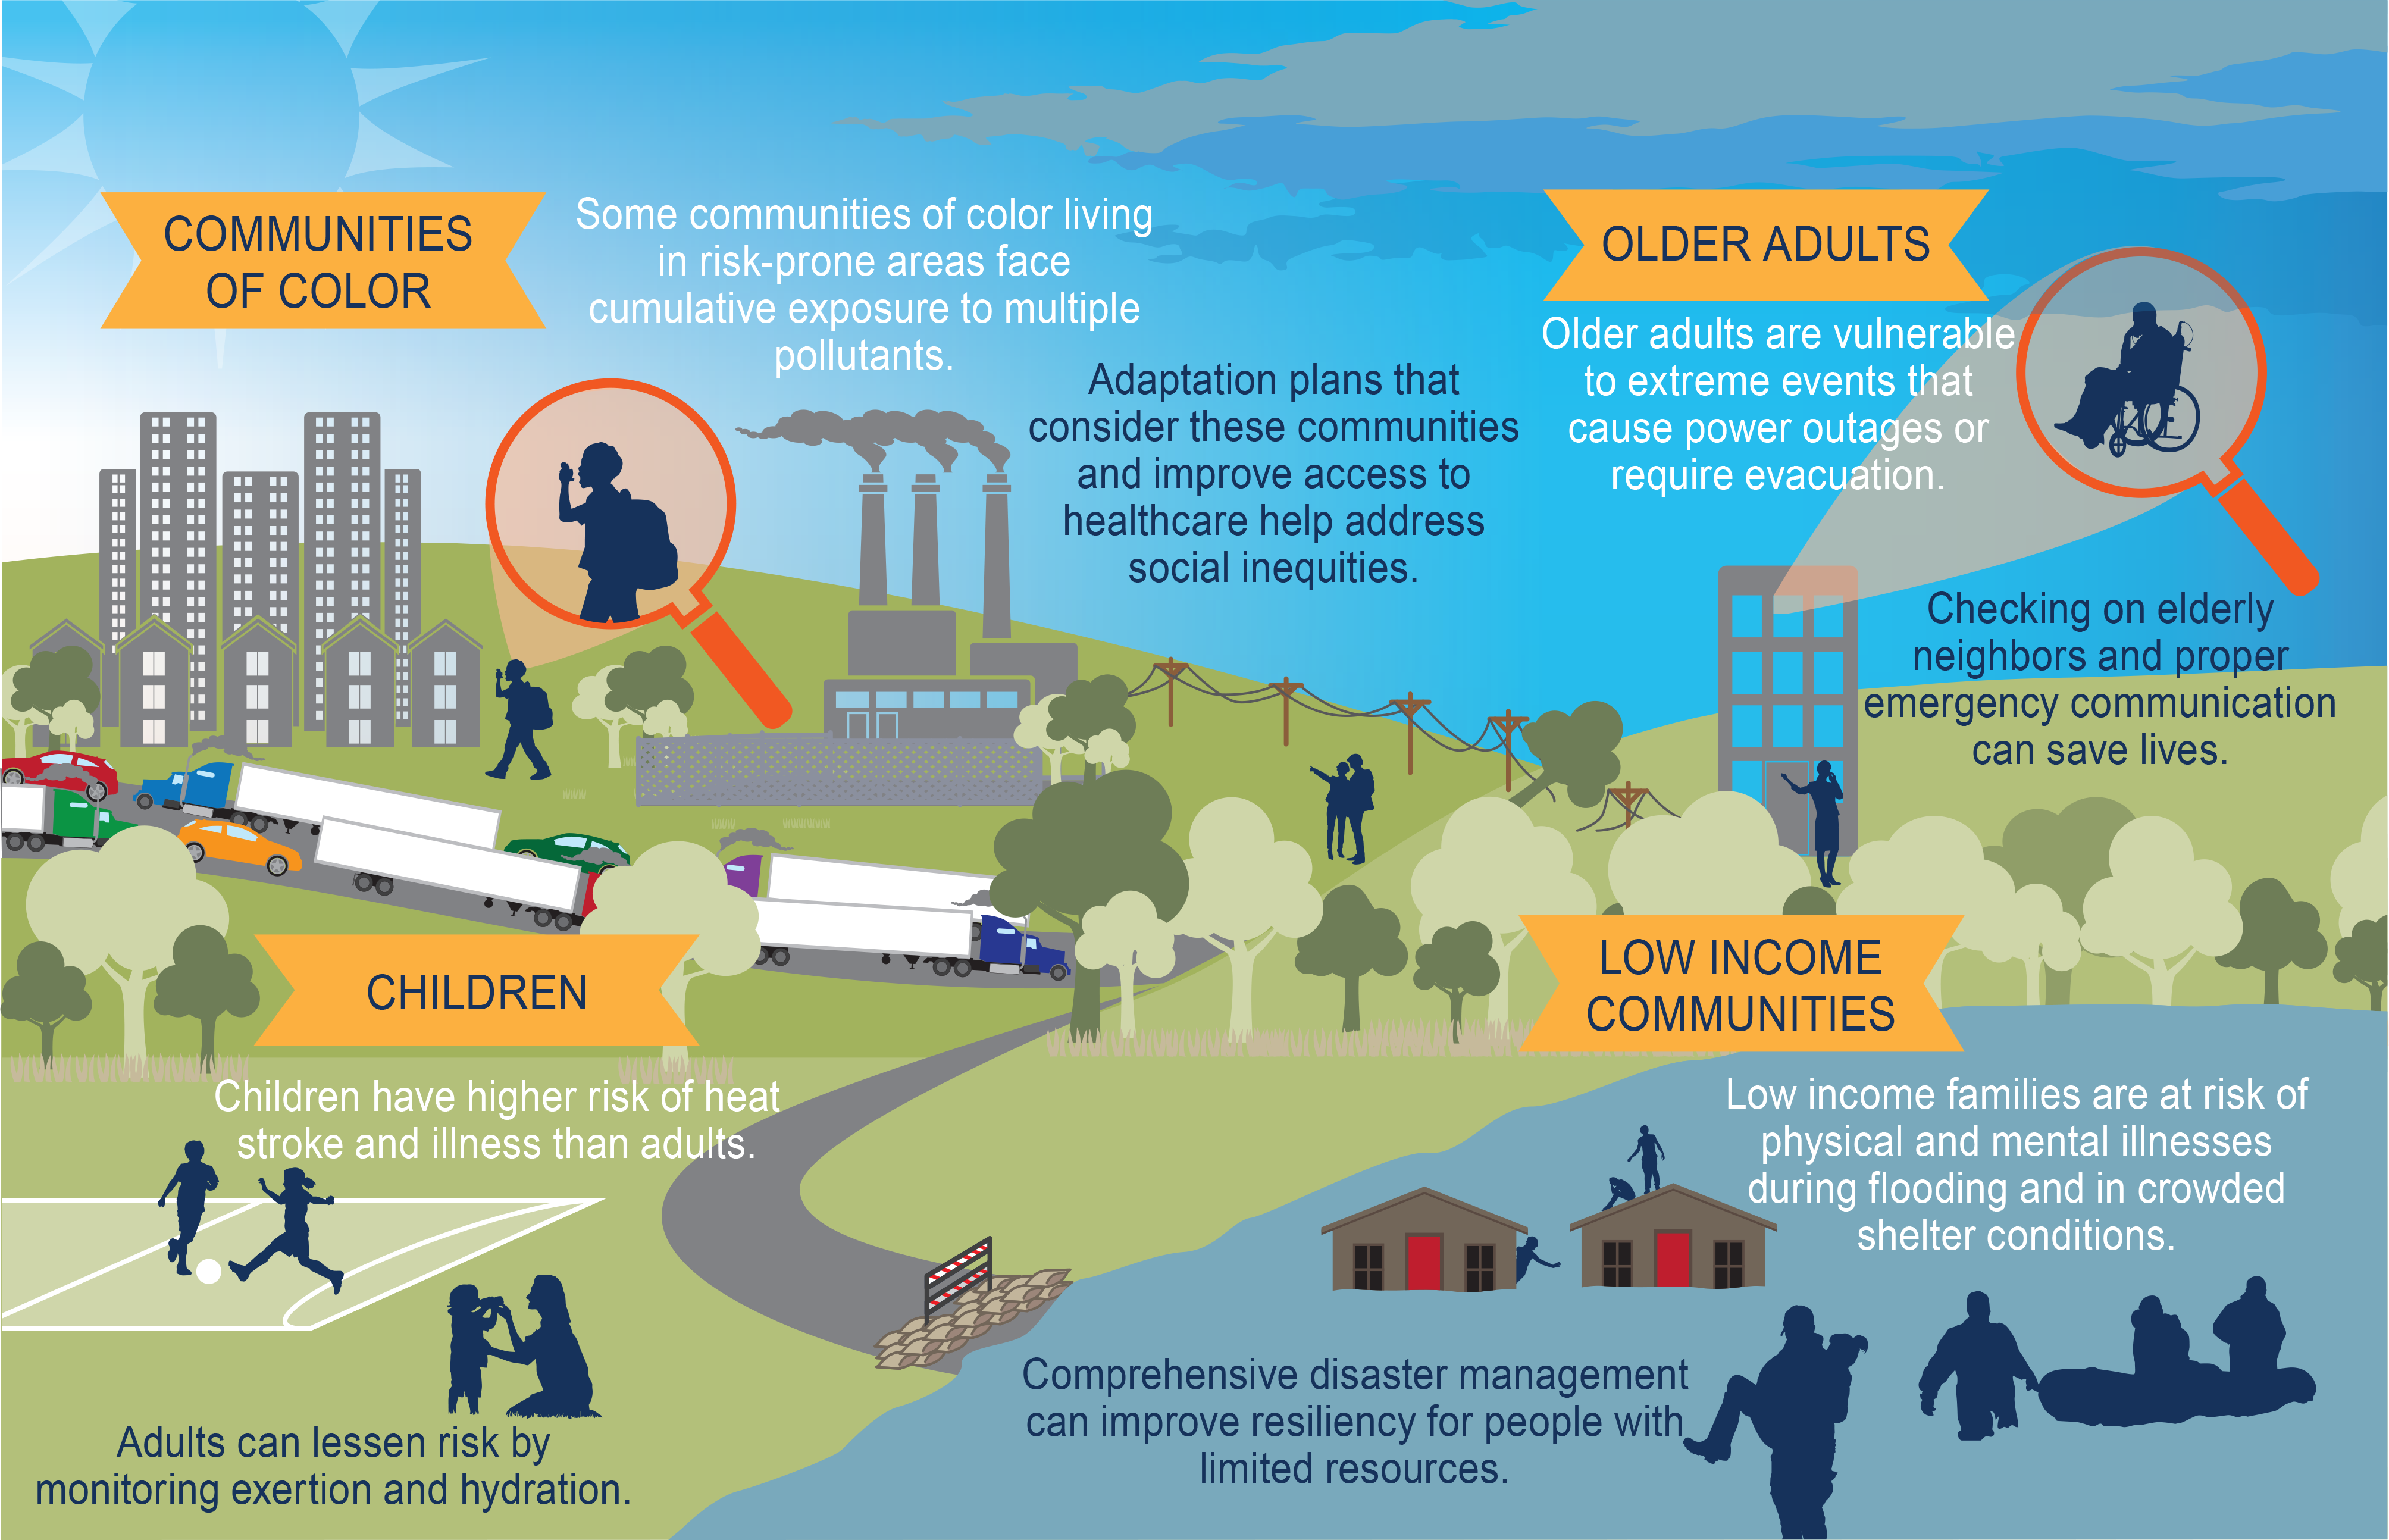 An infographic showing climate-related health risks to communities of color, older adults, children, and low income communities. For full details, visit https://nca2018.globalchange.gov/chapter/14/